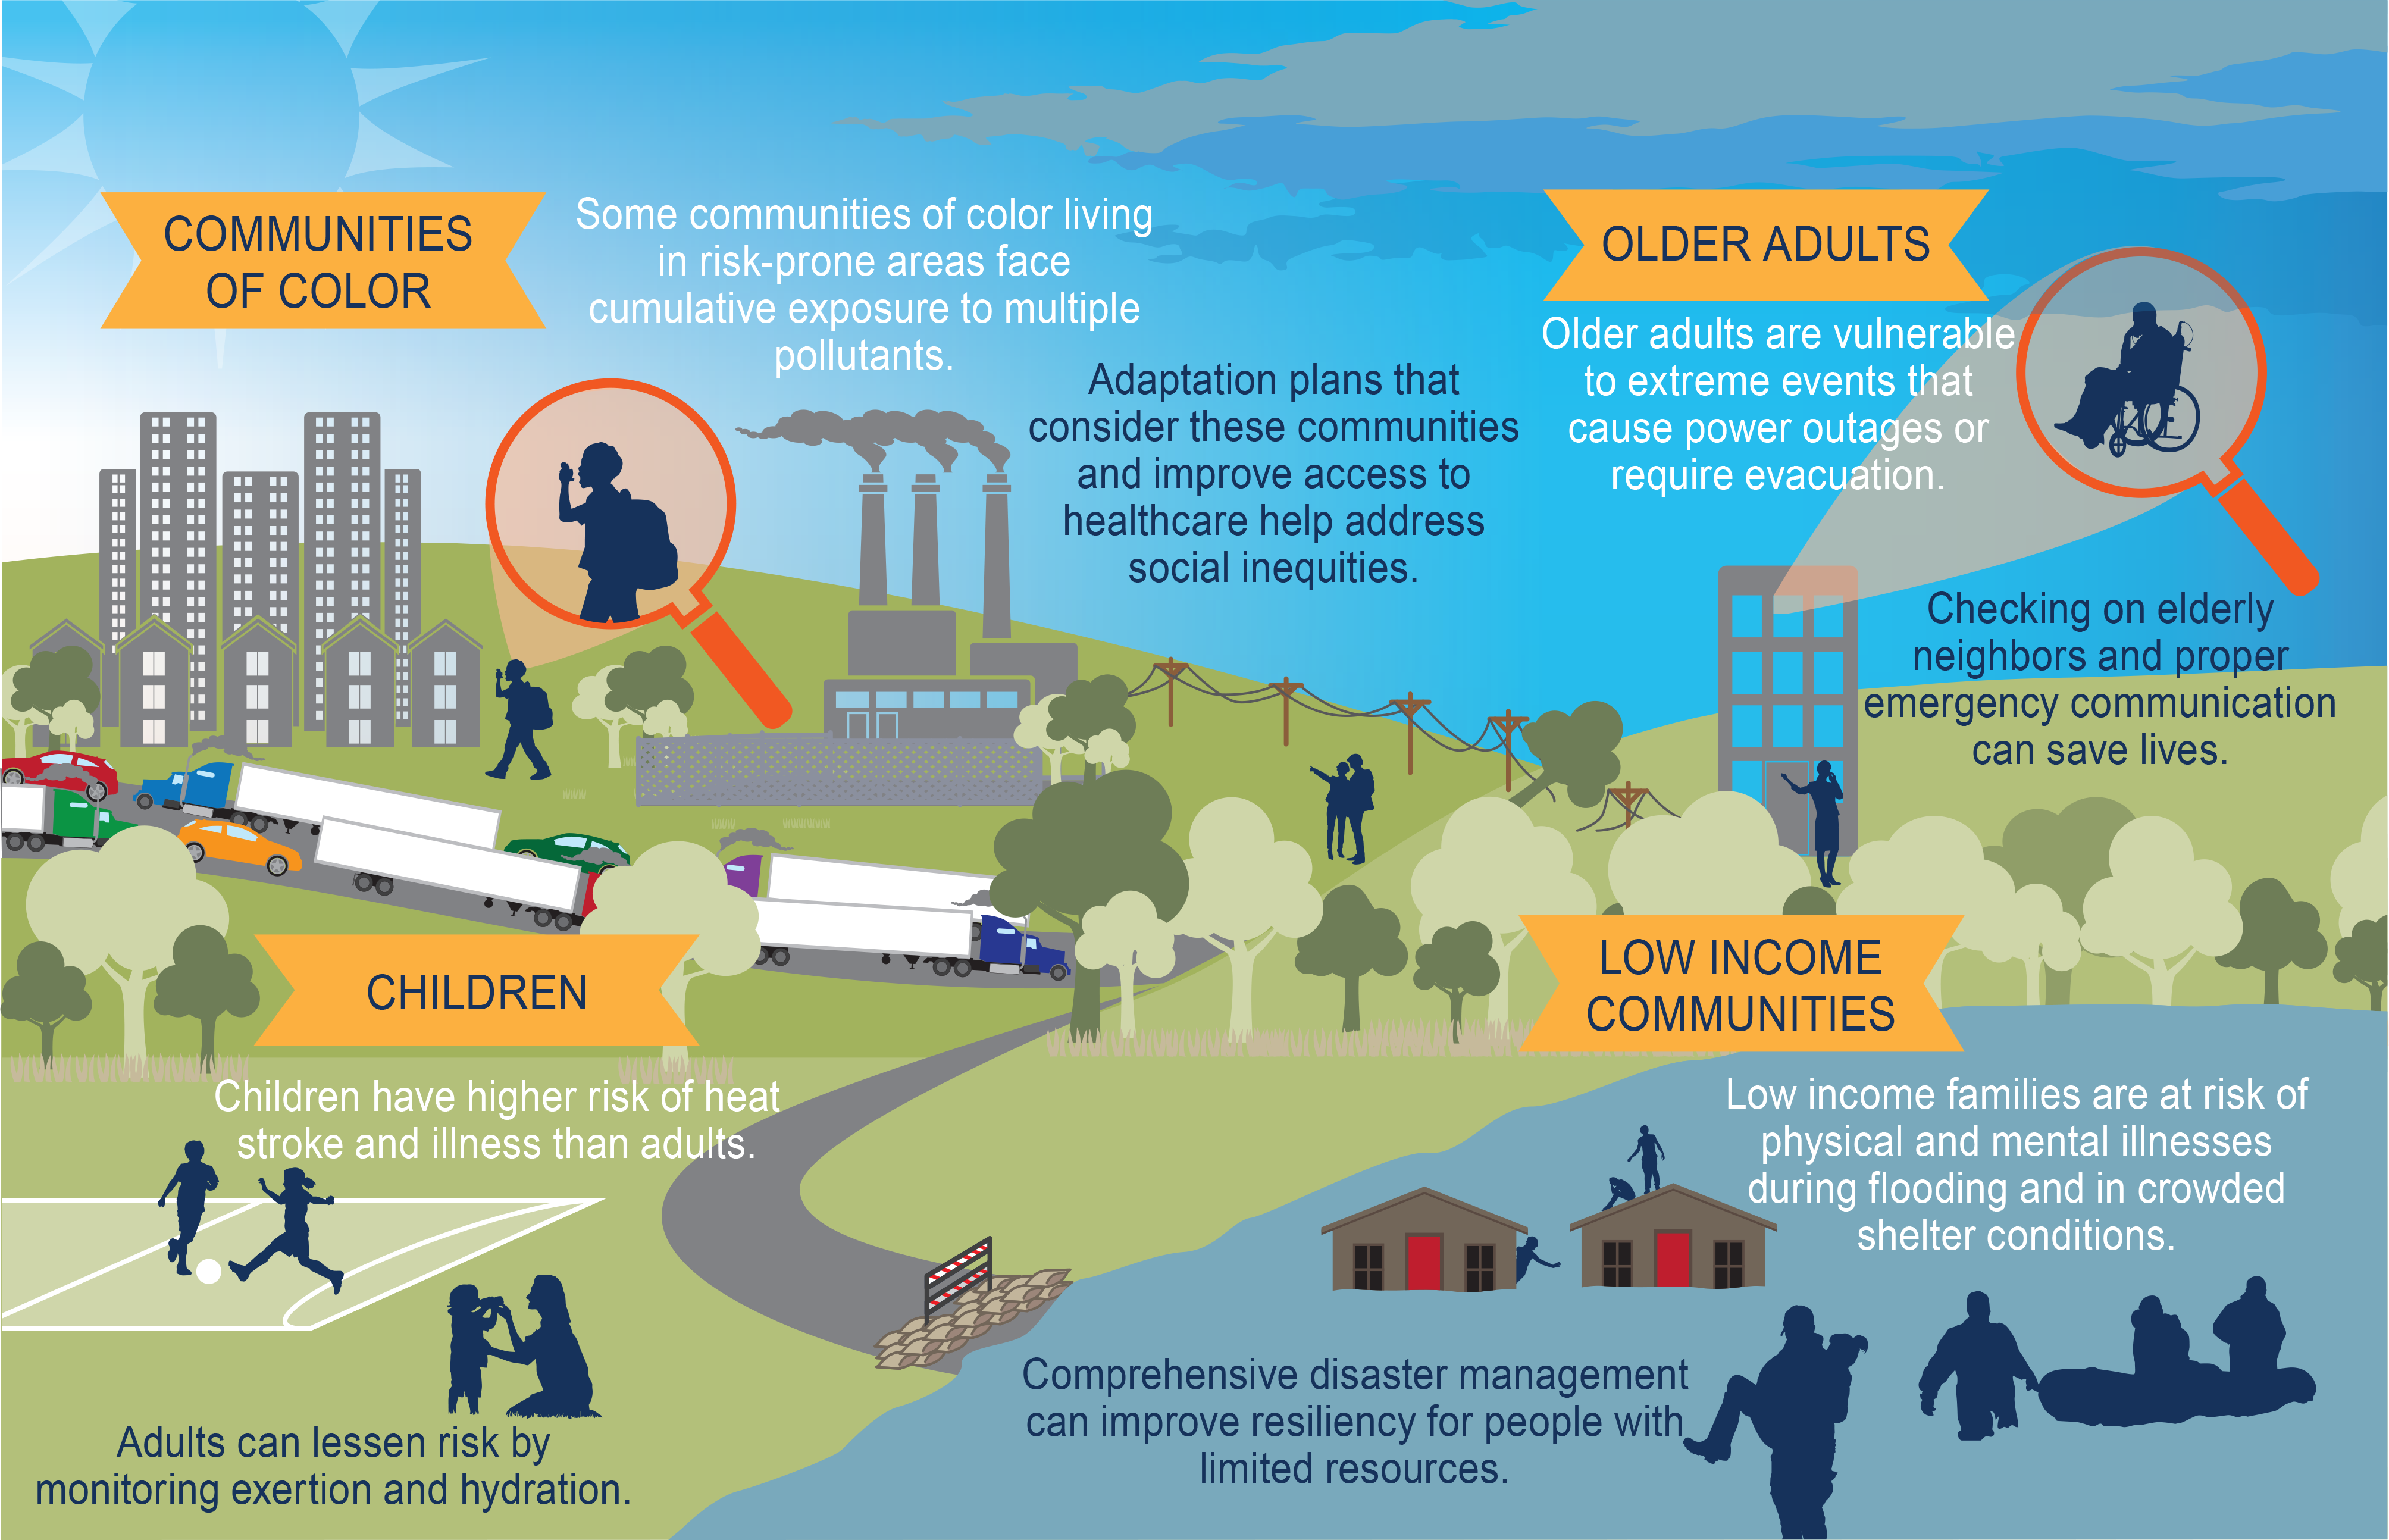 An infographic showing climate-related health risks to communities of color, older adults, children, and low income communities. For full details, visit https://nca2018.globalchange.gov/chapter/14/